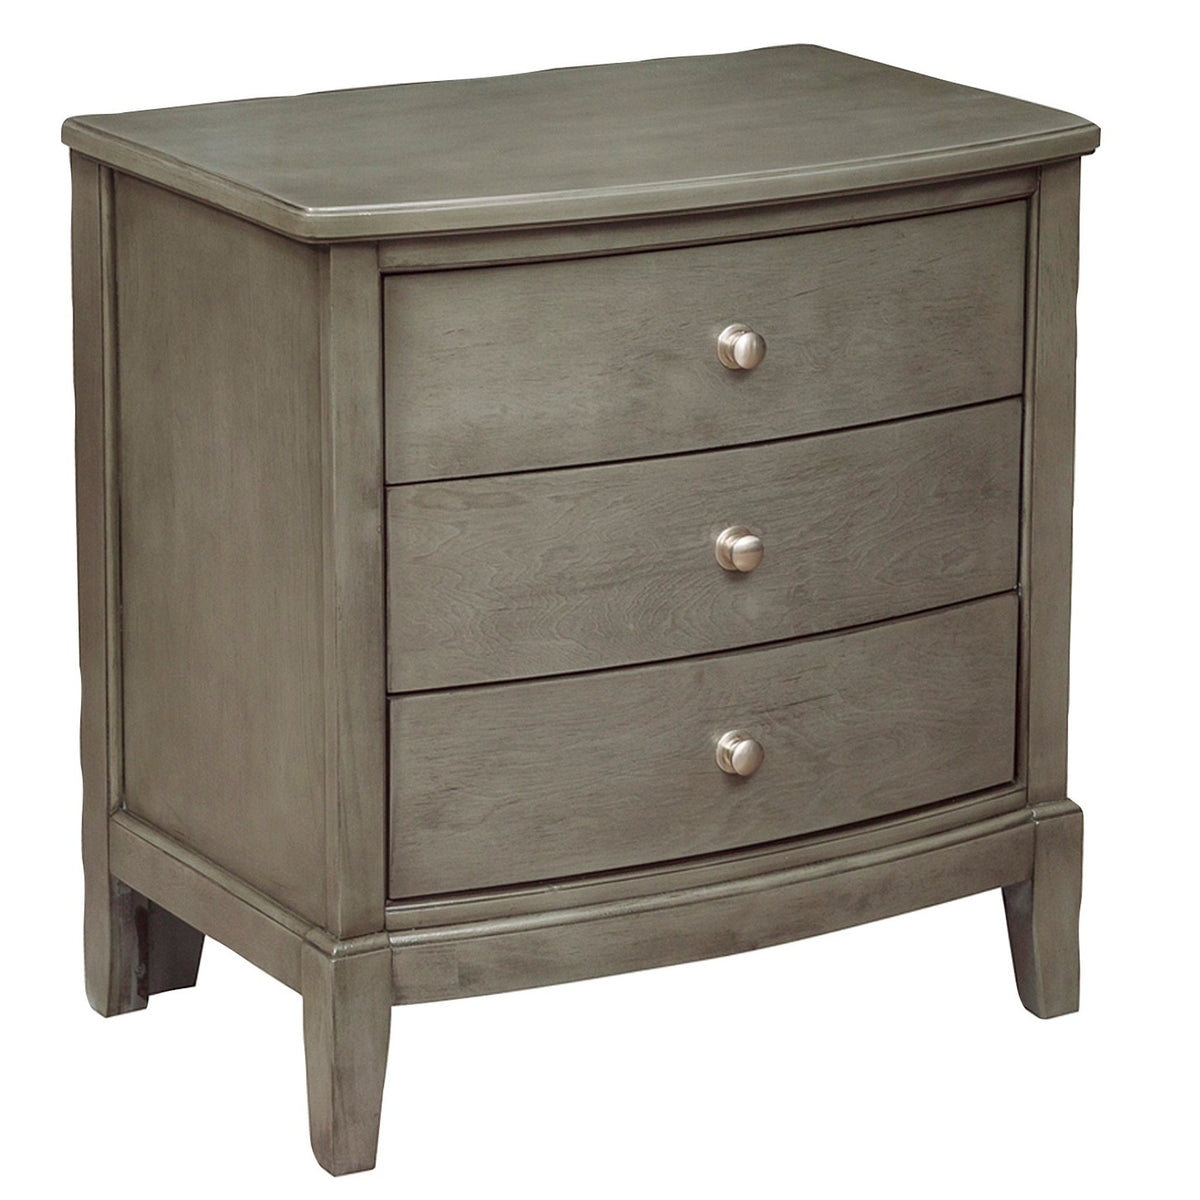 Wooden Nightstand with 3 Spacious Drawers and Knobs, Gray - BM222726